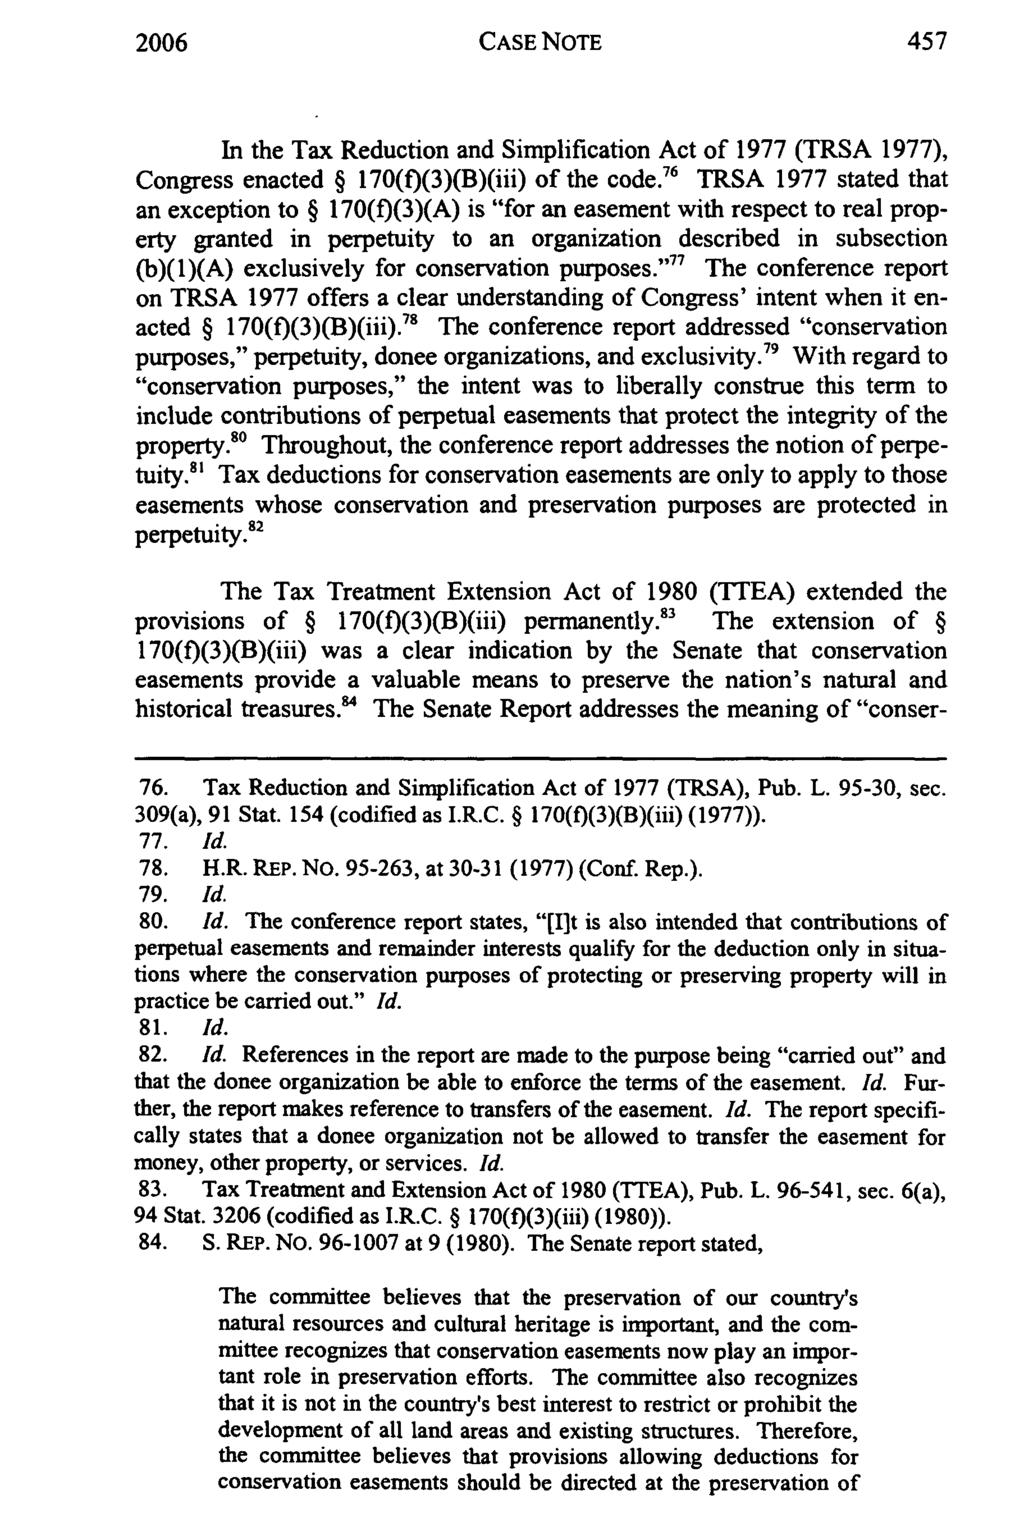 2006 CASE NOTE In the Tax Reduction and Simplification Act of 1977 (TRSA 1977), Congress enacted 170(f)(3)(B)(iii) of the code.